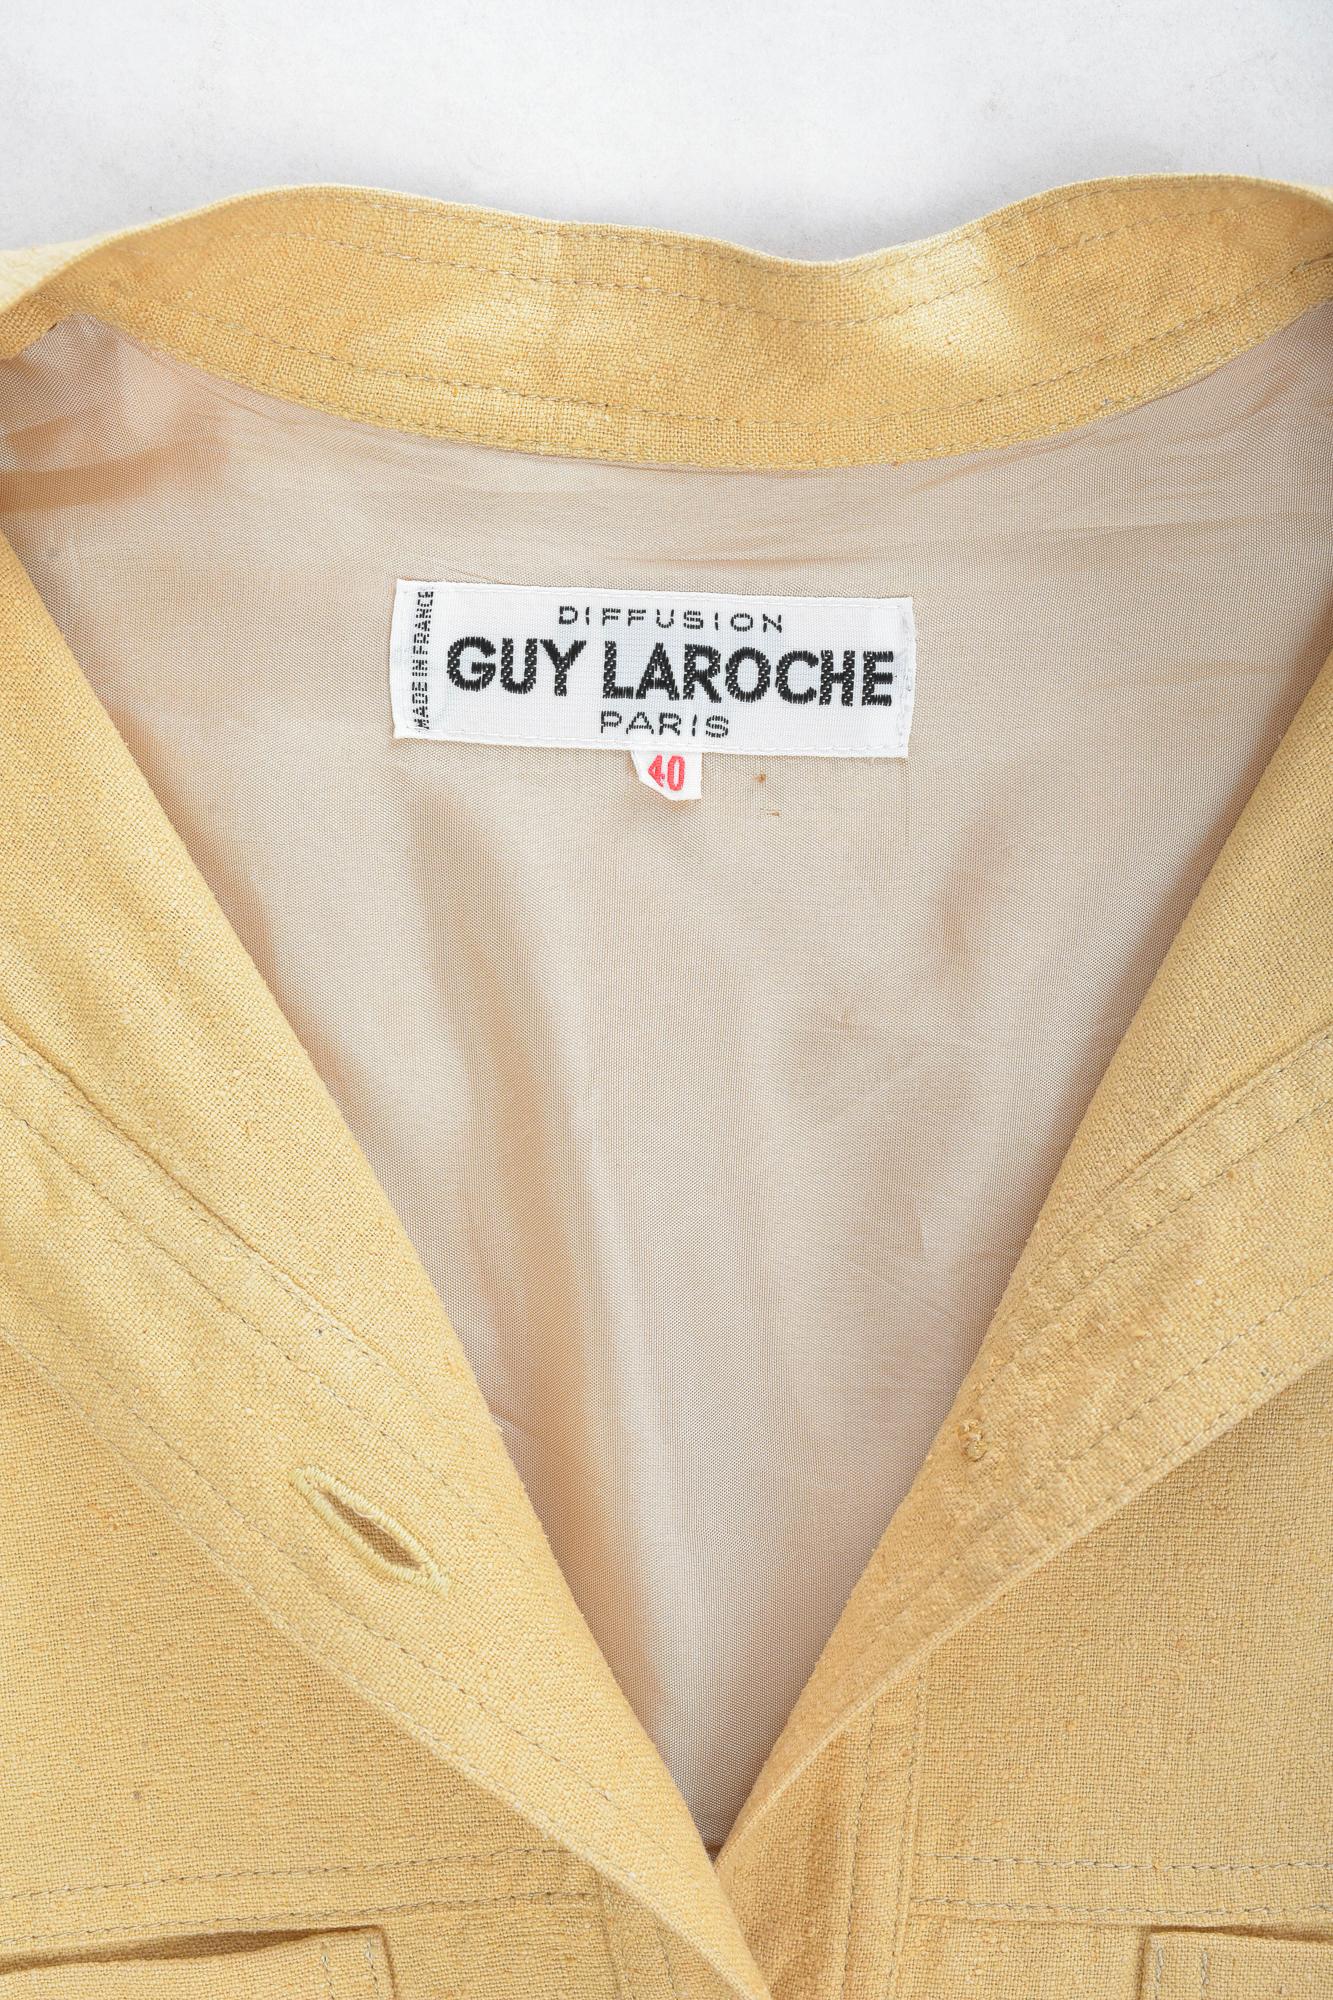 Circa 1975 - 1980

France

Rare Saharienne shirt blouse from Guy Laroche Boutique dating from the early days of the famous Parisian fashion house. Blouse with long sleeves and Mao collar, four stitched pockets and matching plastic